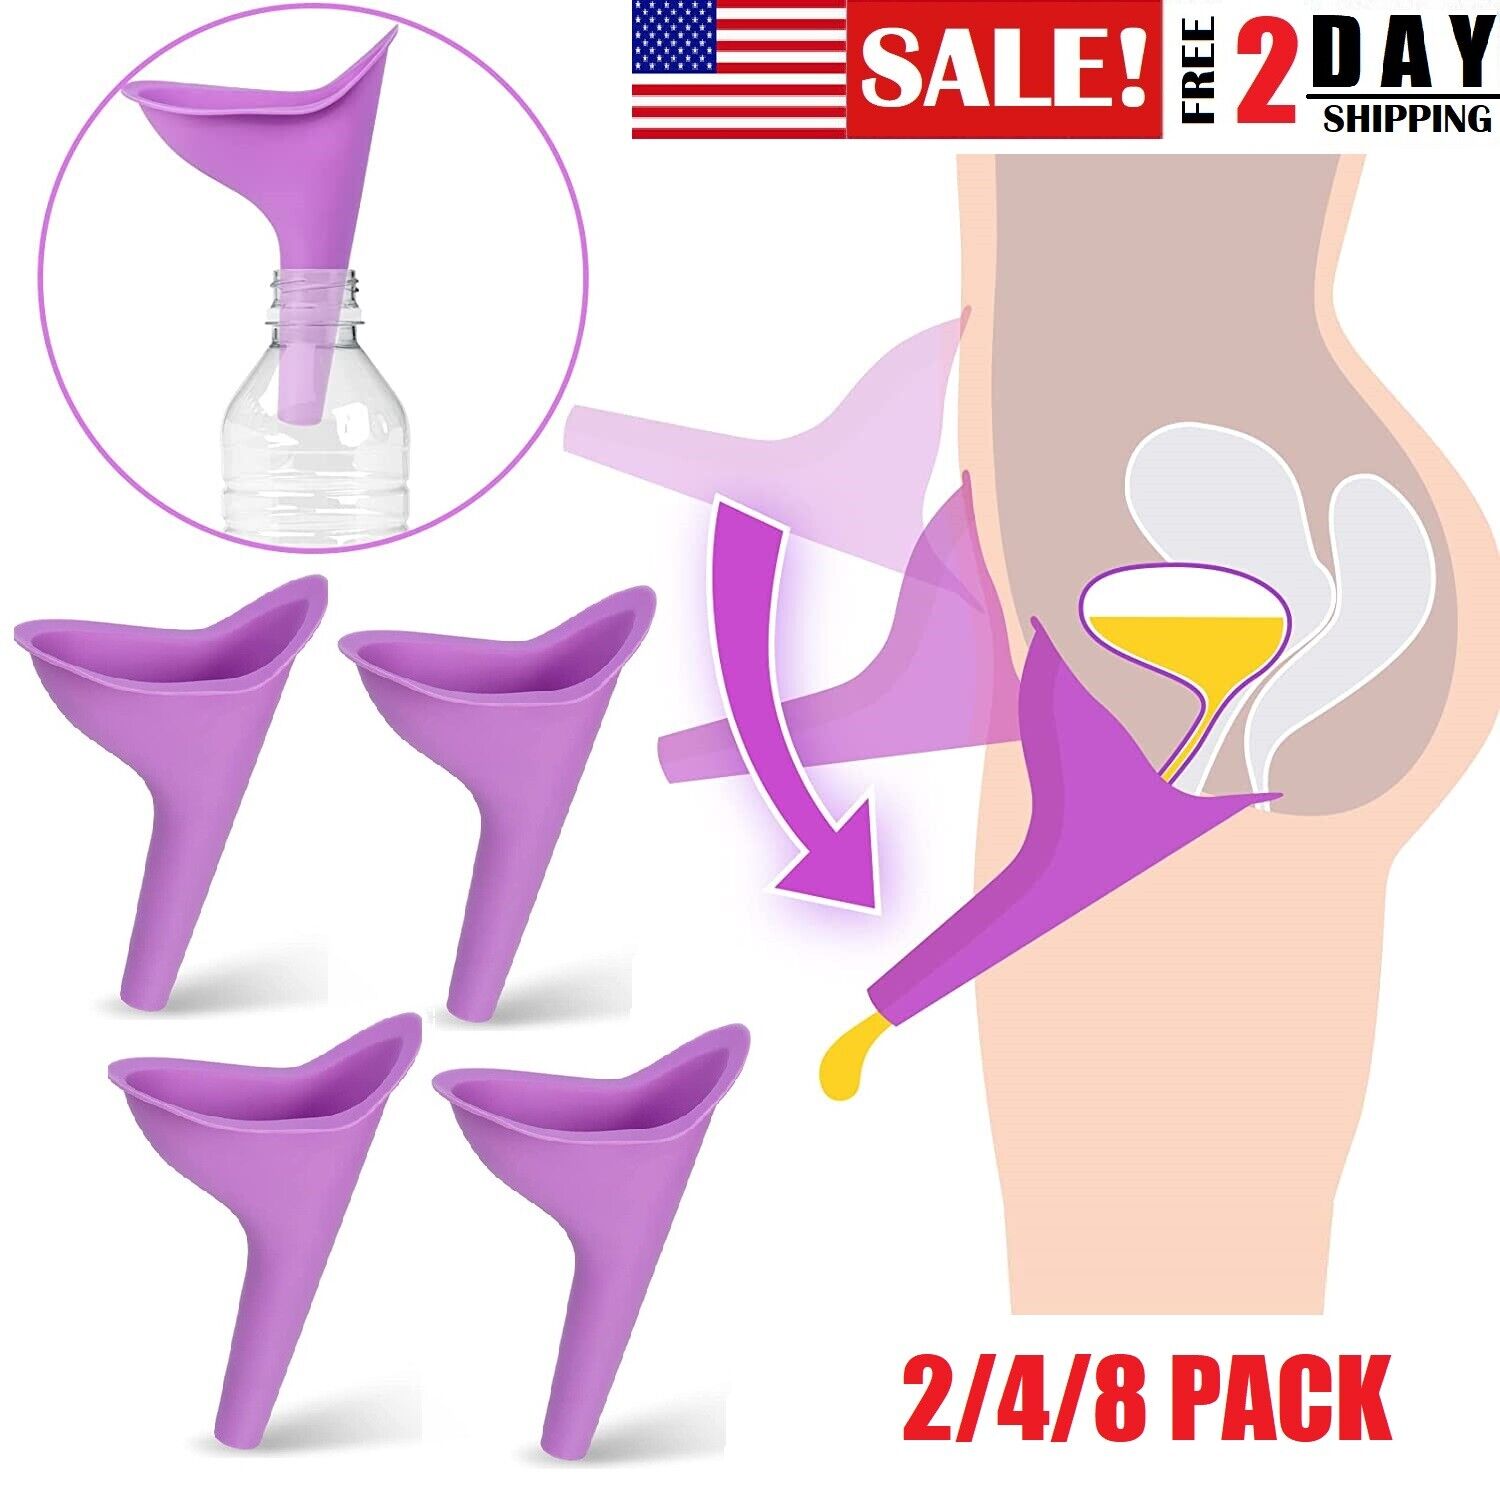 8× Portable Female Ladies Urinal Funnel Camping Travel Toilet Stand Pee Device